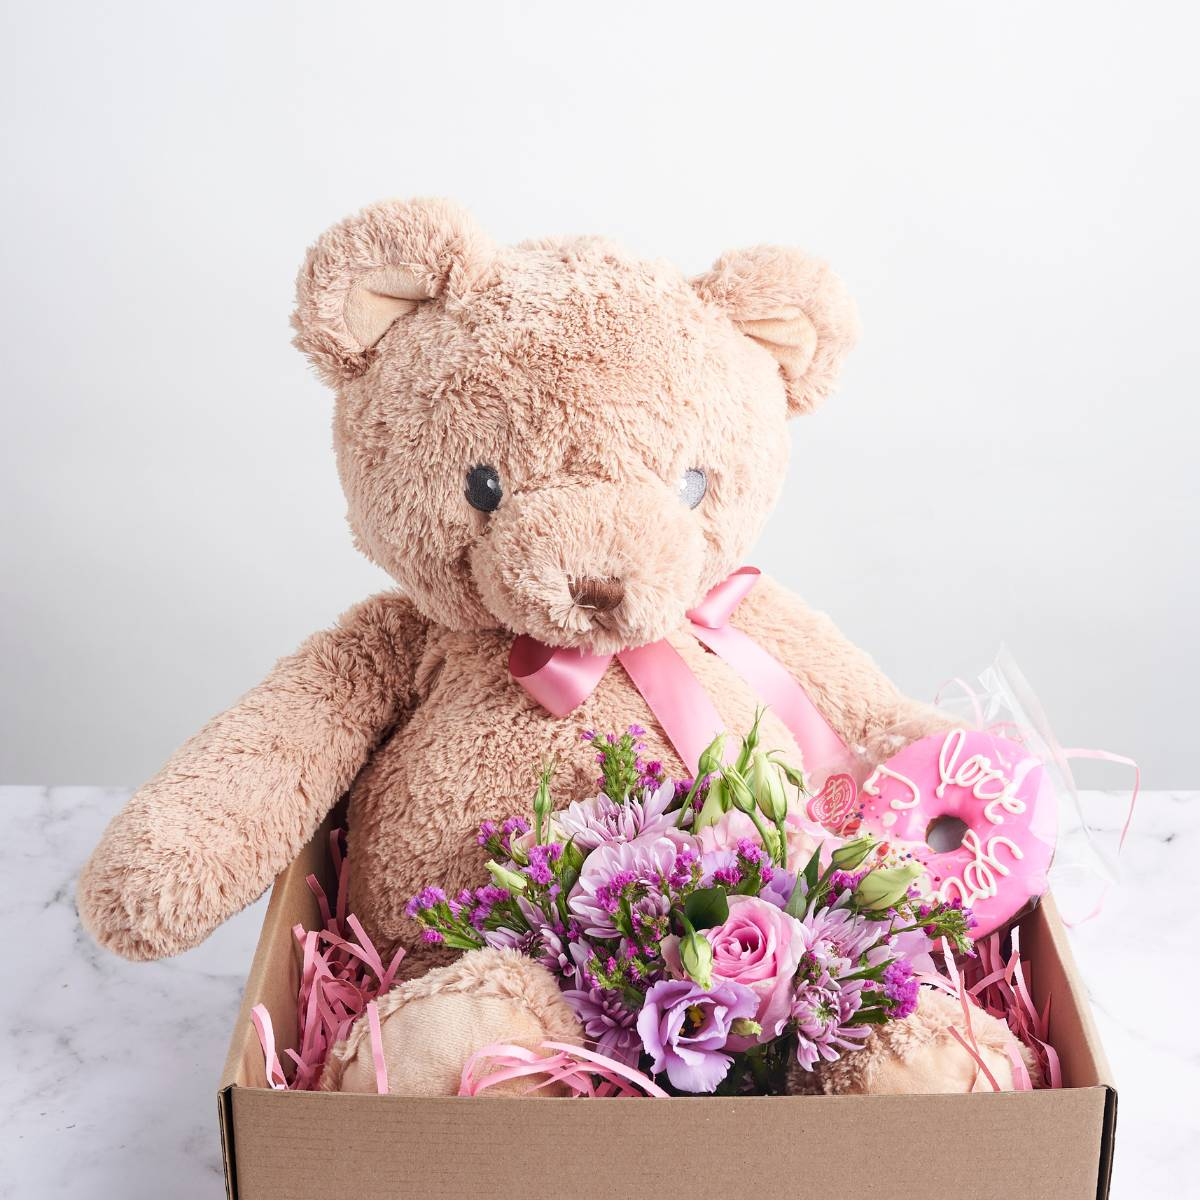 baby's essentials, new mom friend, baby's life, mom's hair, all the essentials, teddy bear, flowers